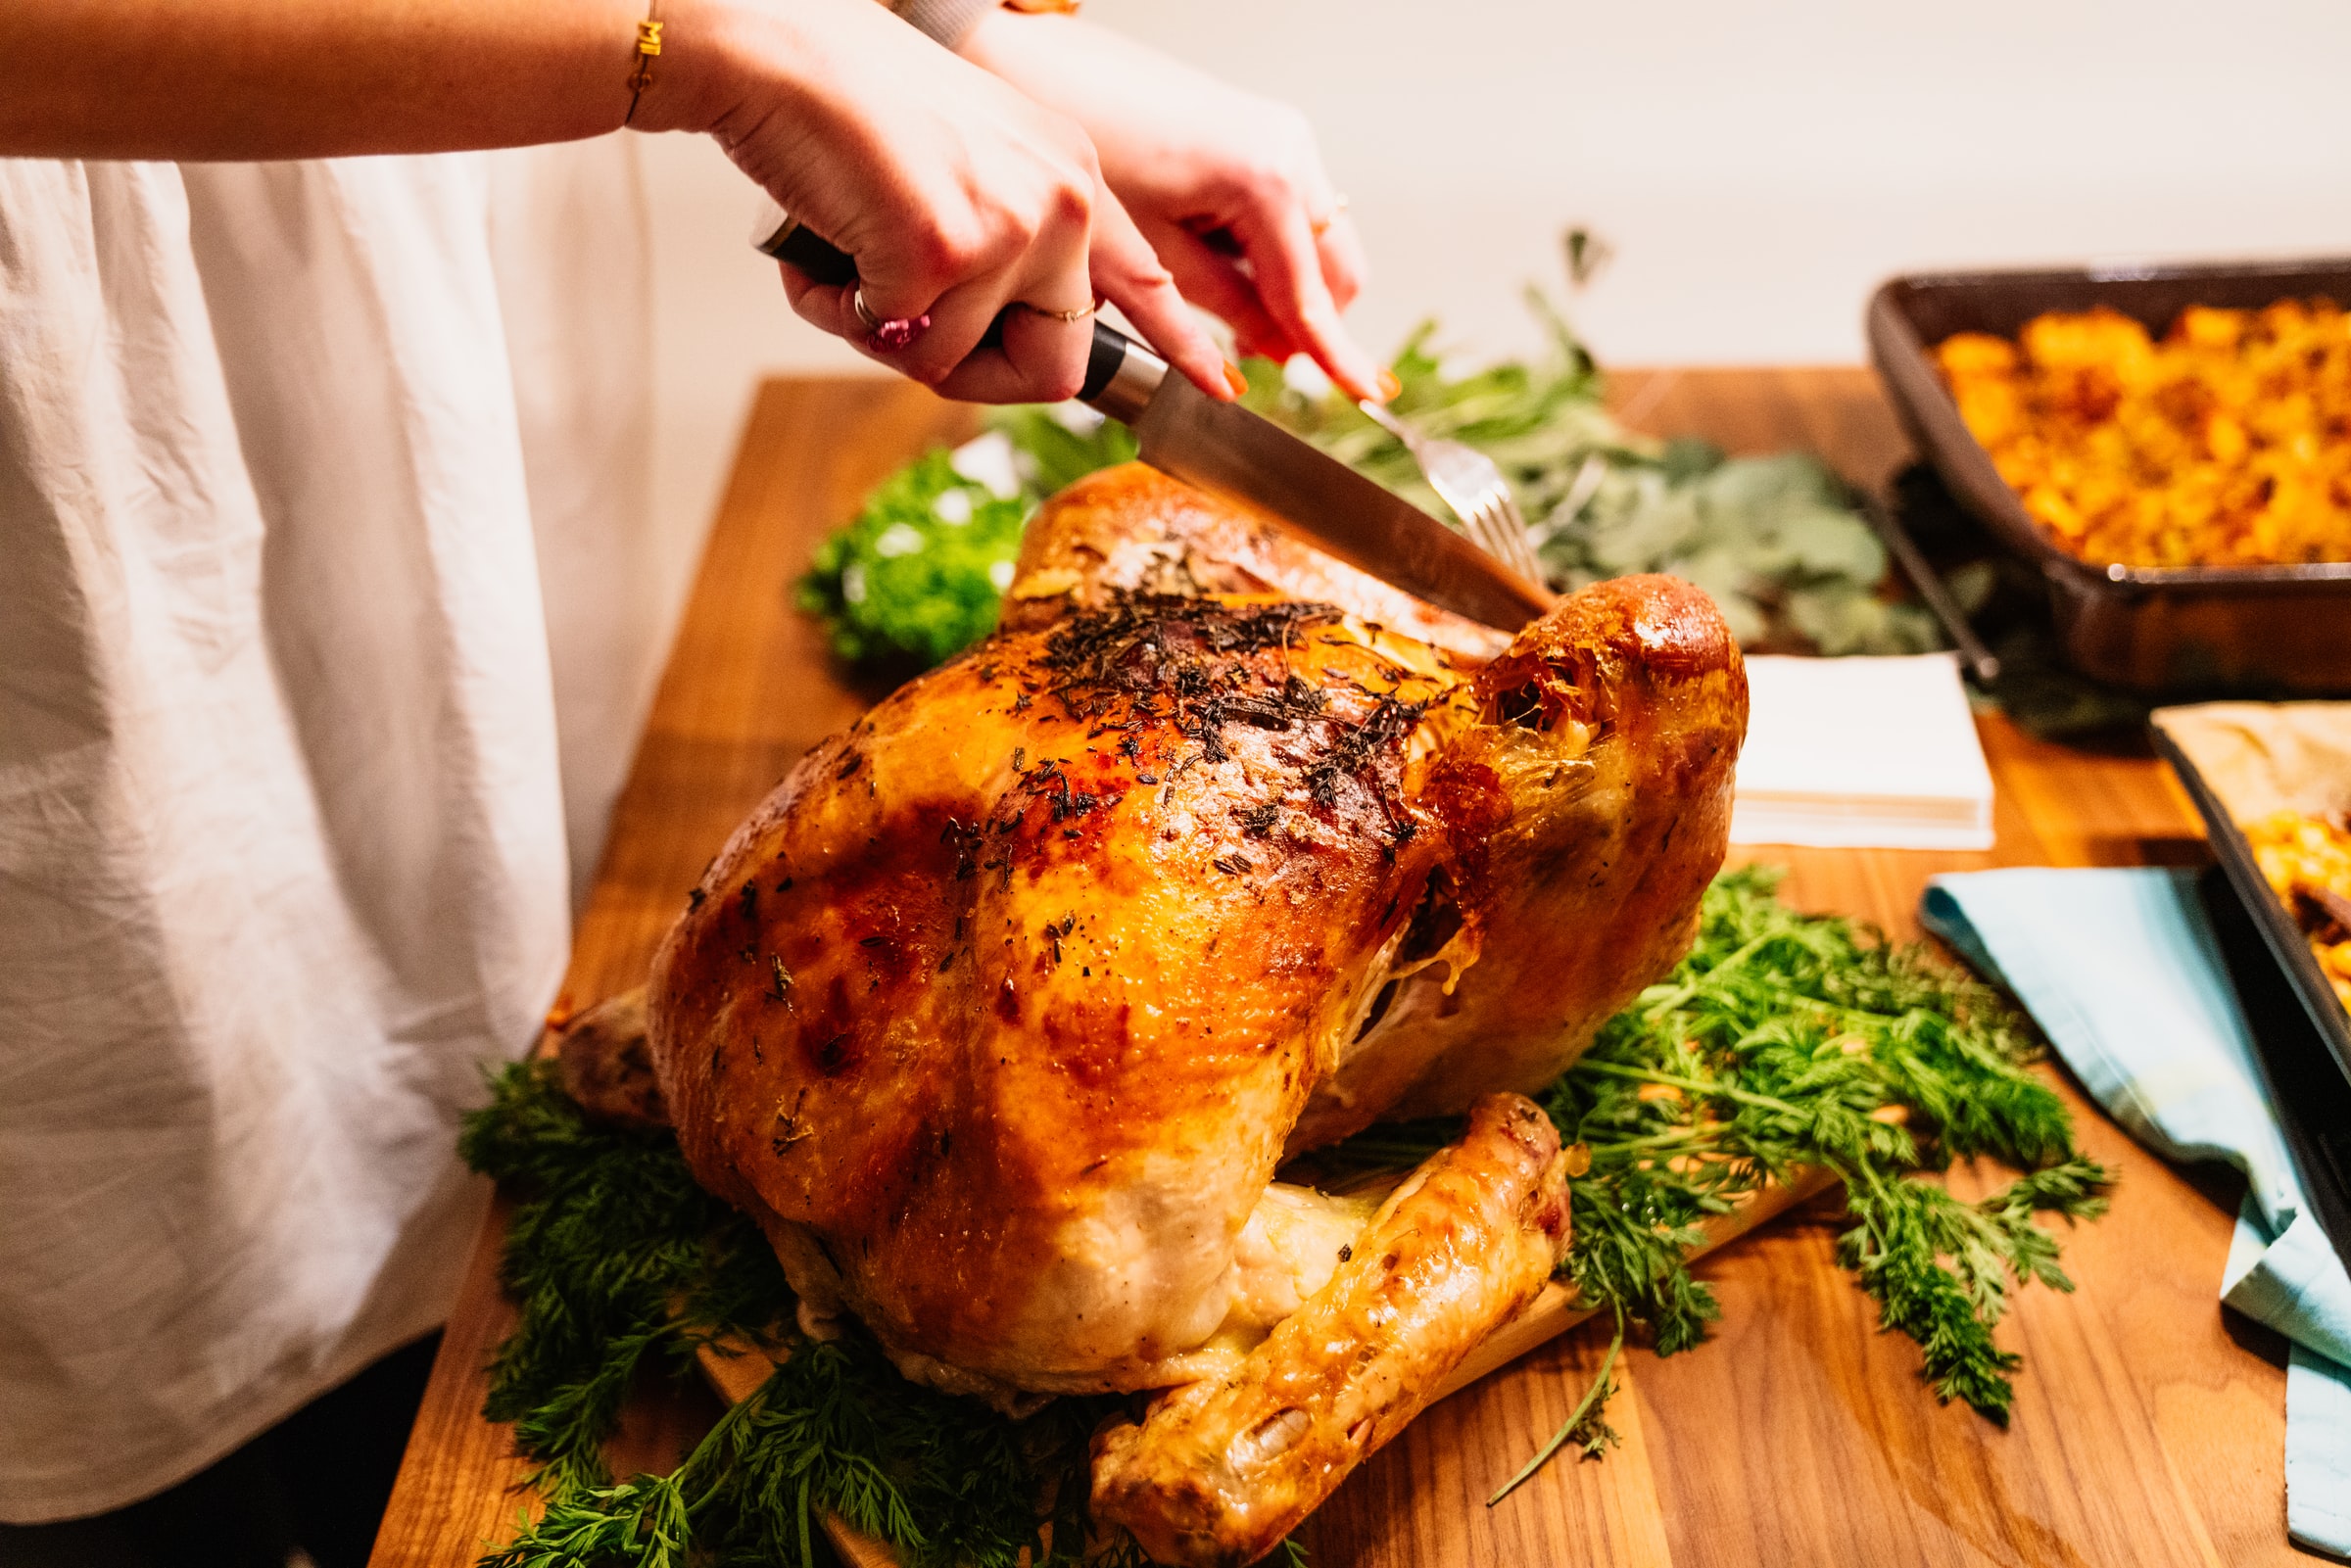 Food Safety Tips for Thanksgiving Meal Preparation